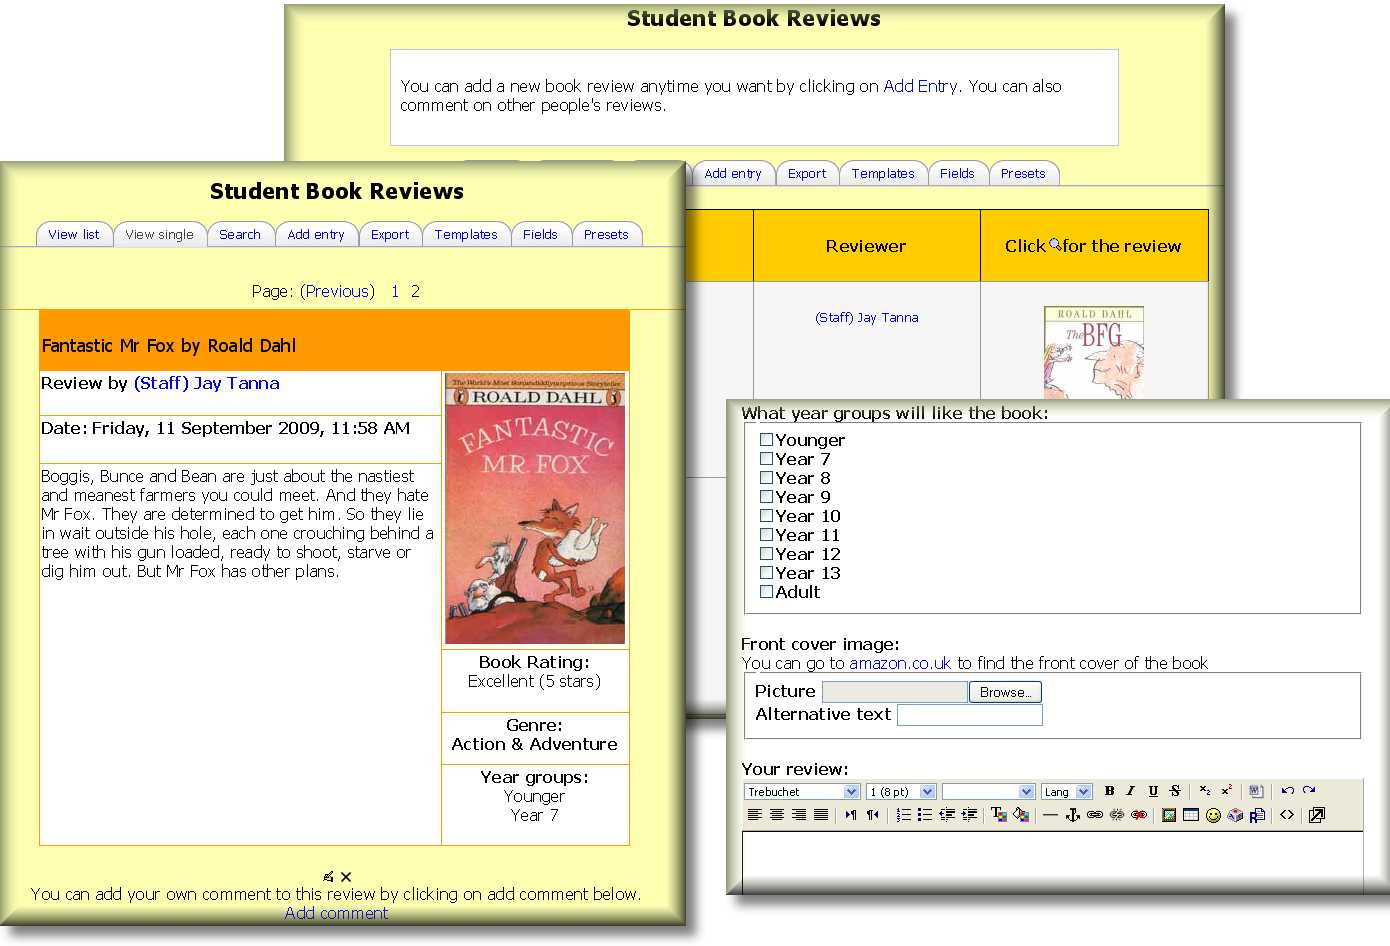 Student_Book_Reviews